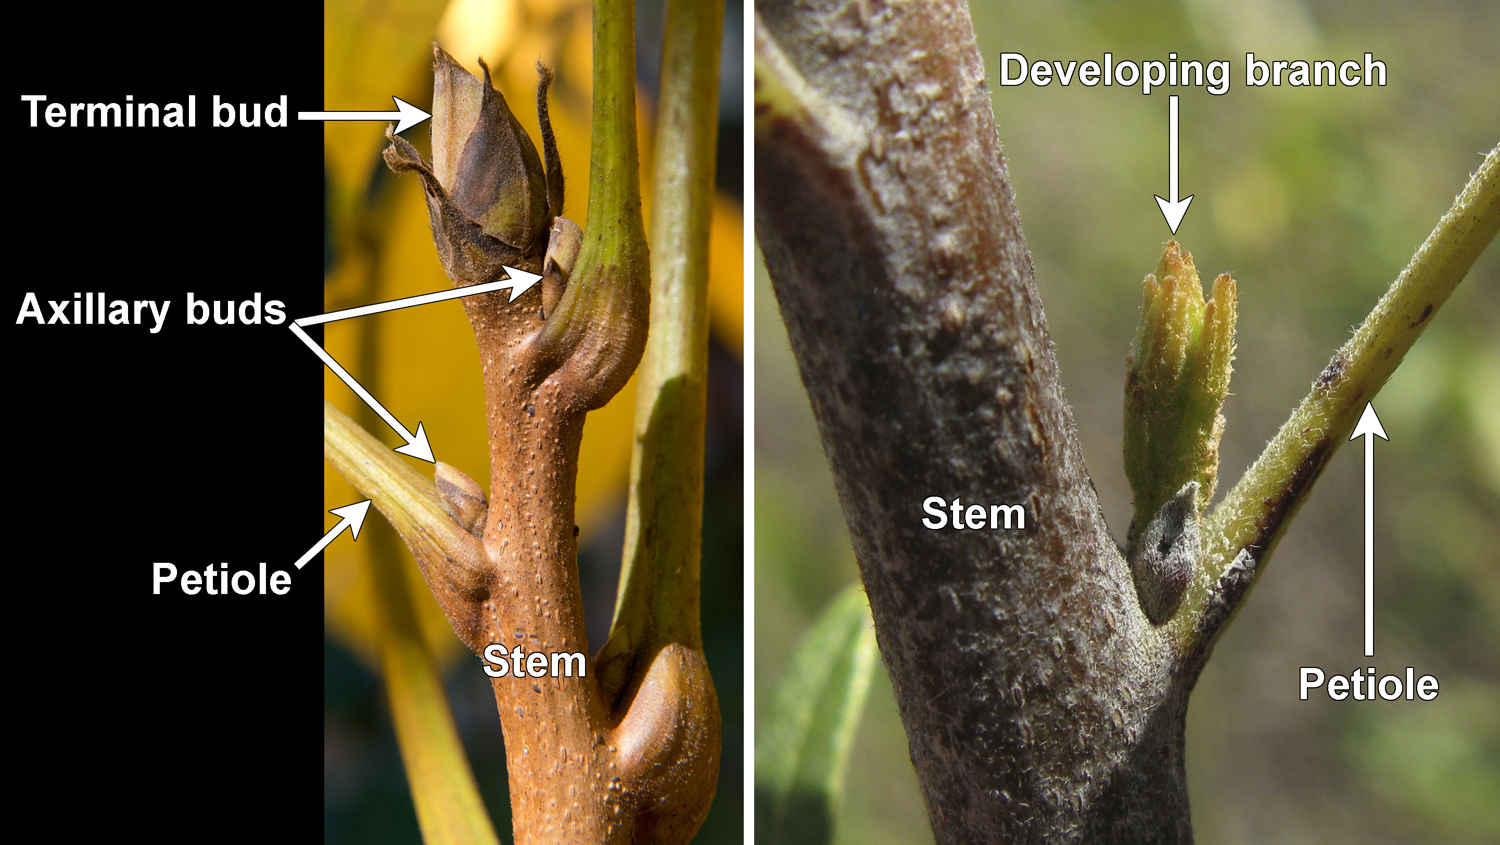 2-Panel photo figure. Panel 1: Branch of shellbark hickory with buds in the axils of the leaves. Panel 2. Branch of willow karee with a single axillary bud beginning to grow into a branch.